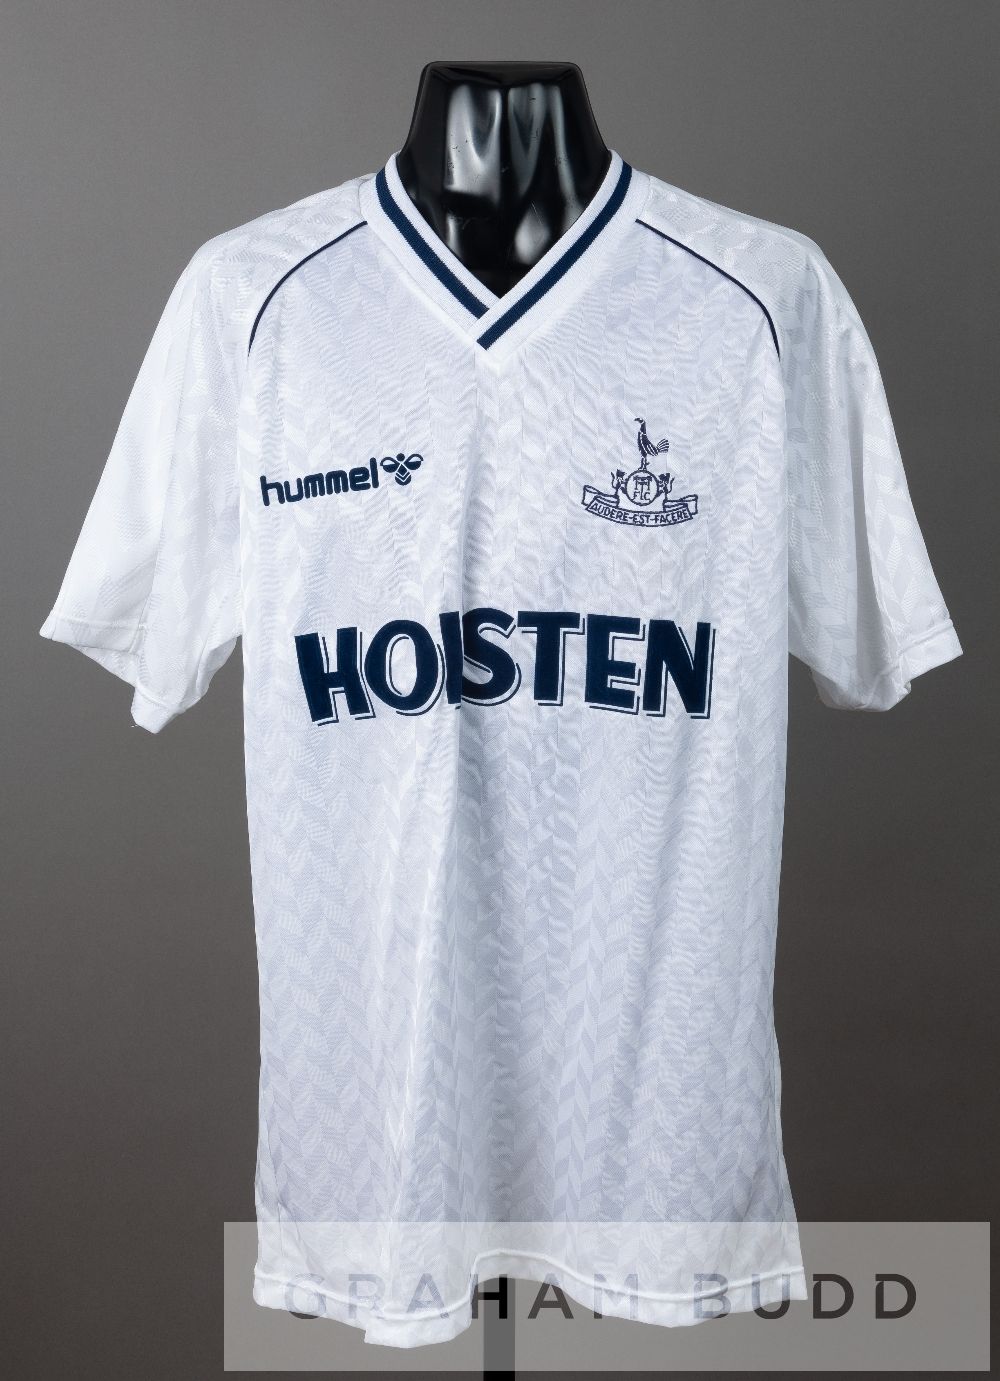 White Tottenham Hotspur no.14 substitute's jersey, circa 1988, by Hummel, short-sleeved with